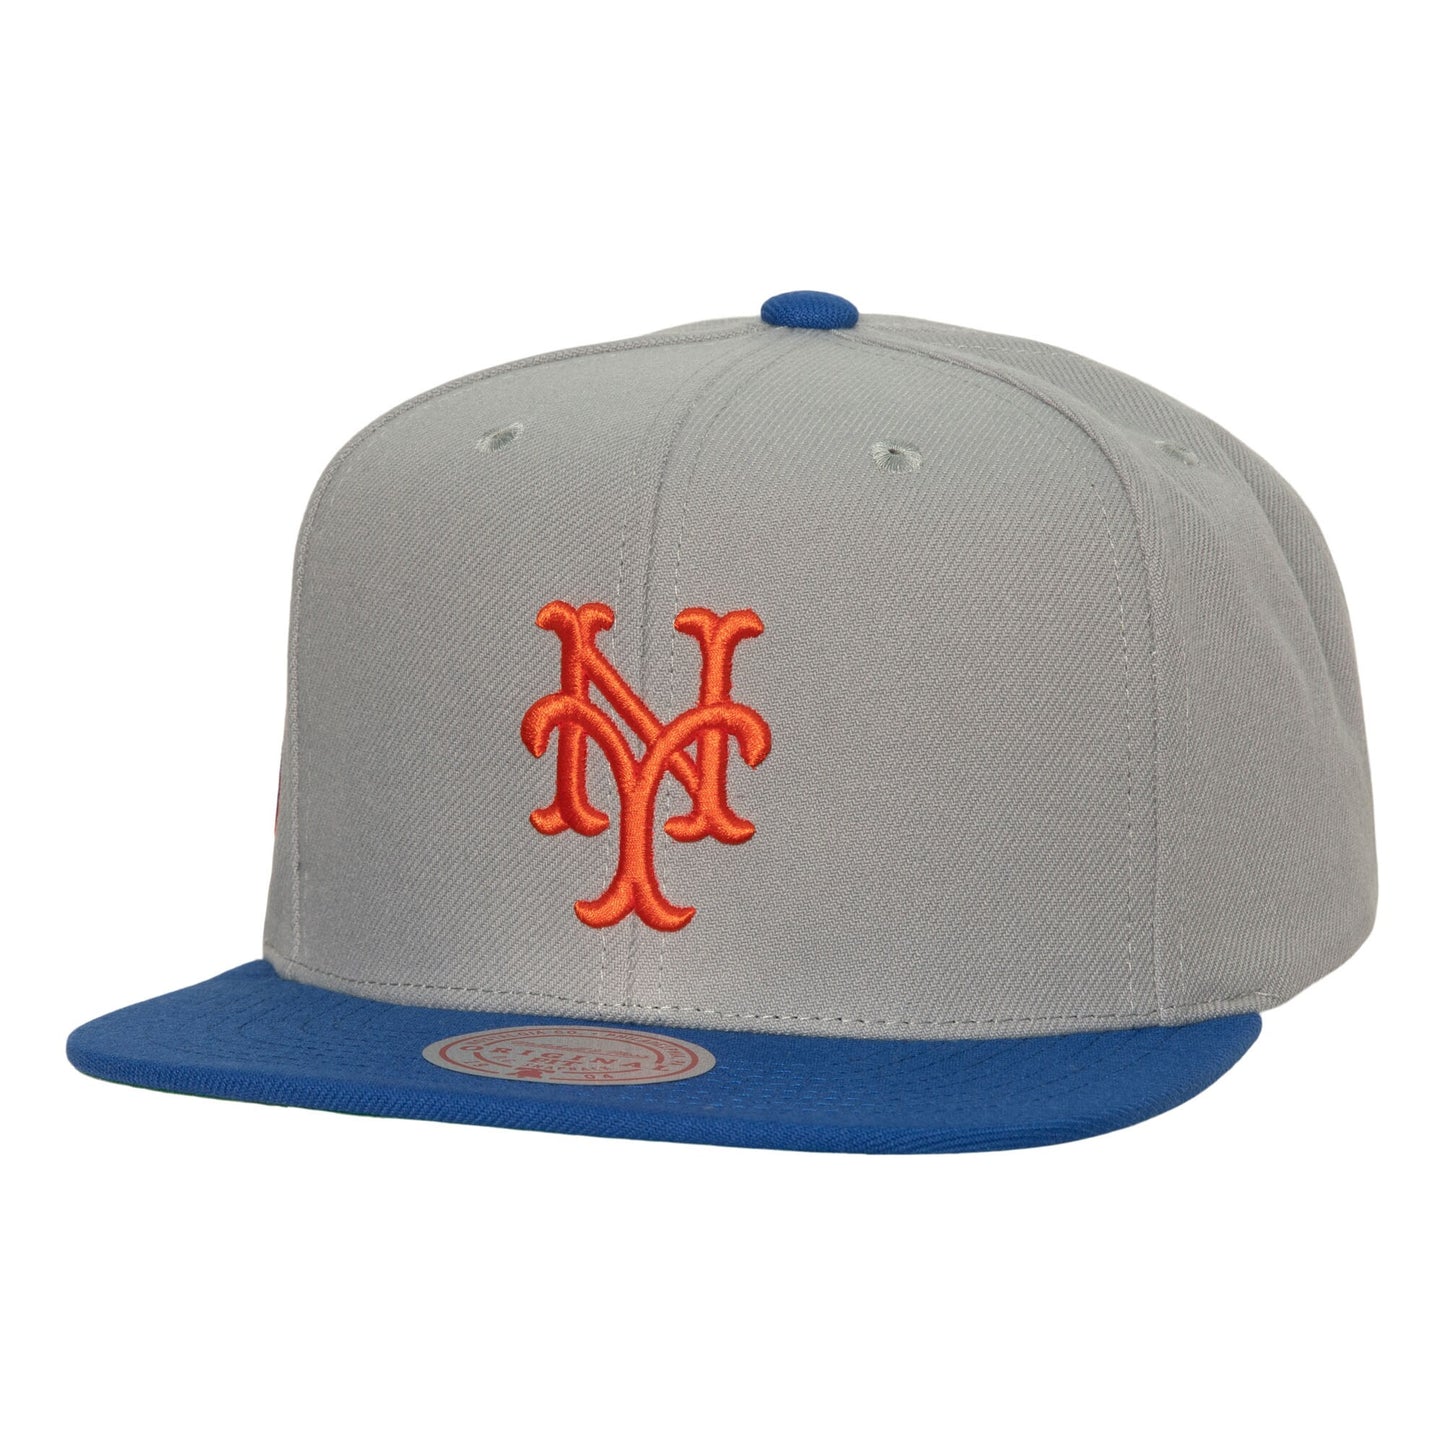 New York Mets Mitchell & Ness Cooperstown Collection Away Snapback Hat - Gray